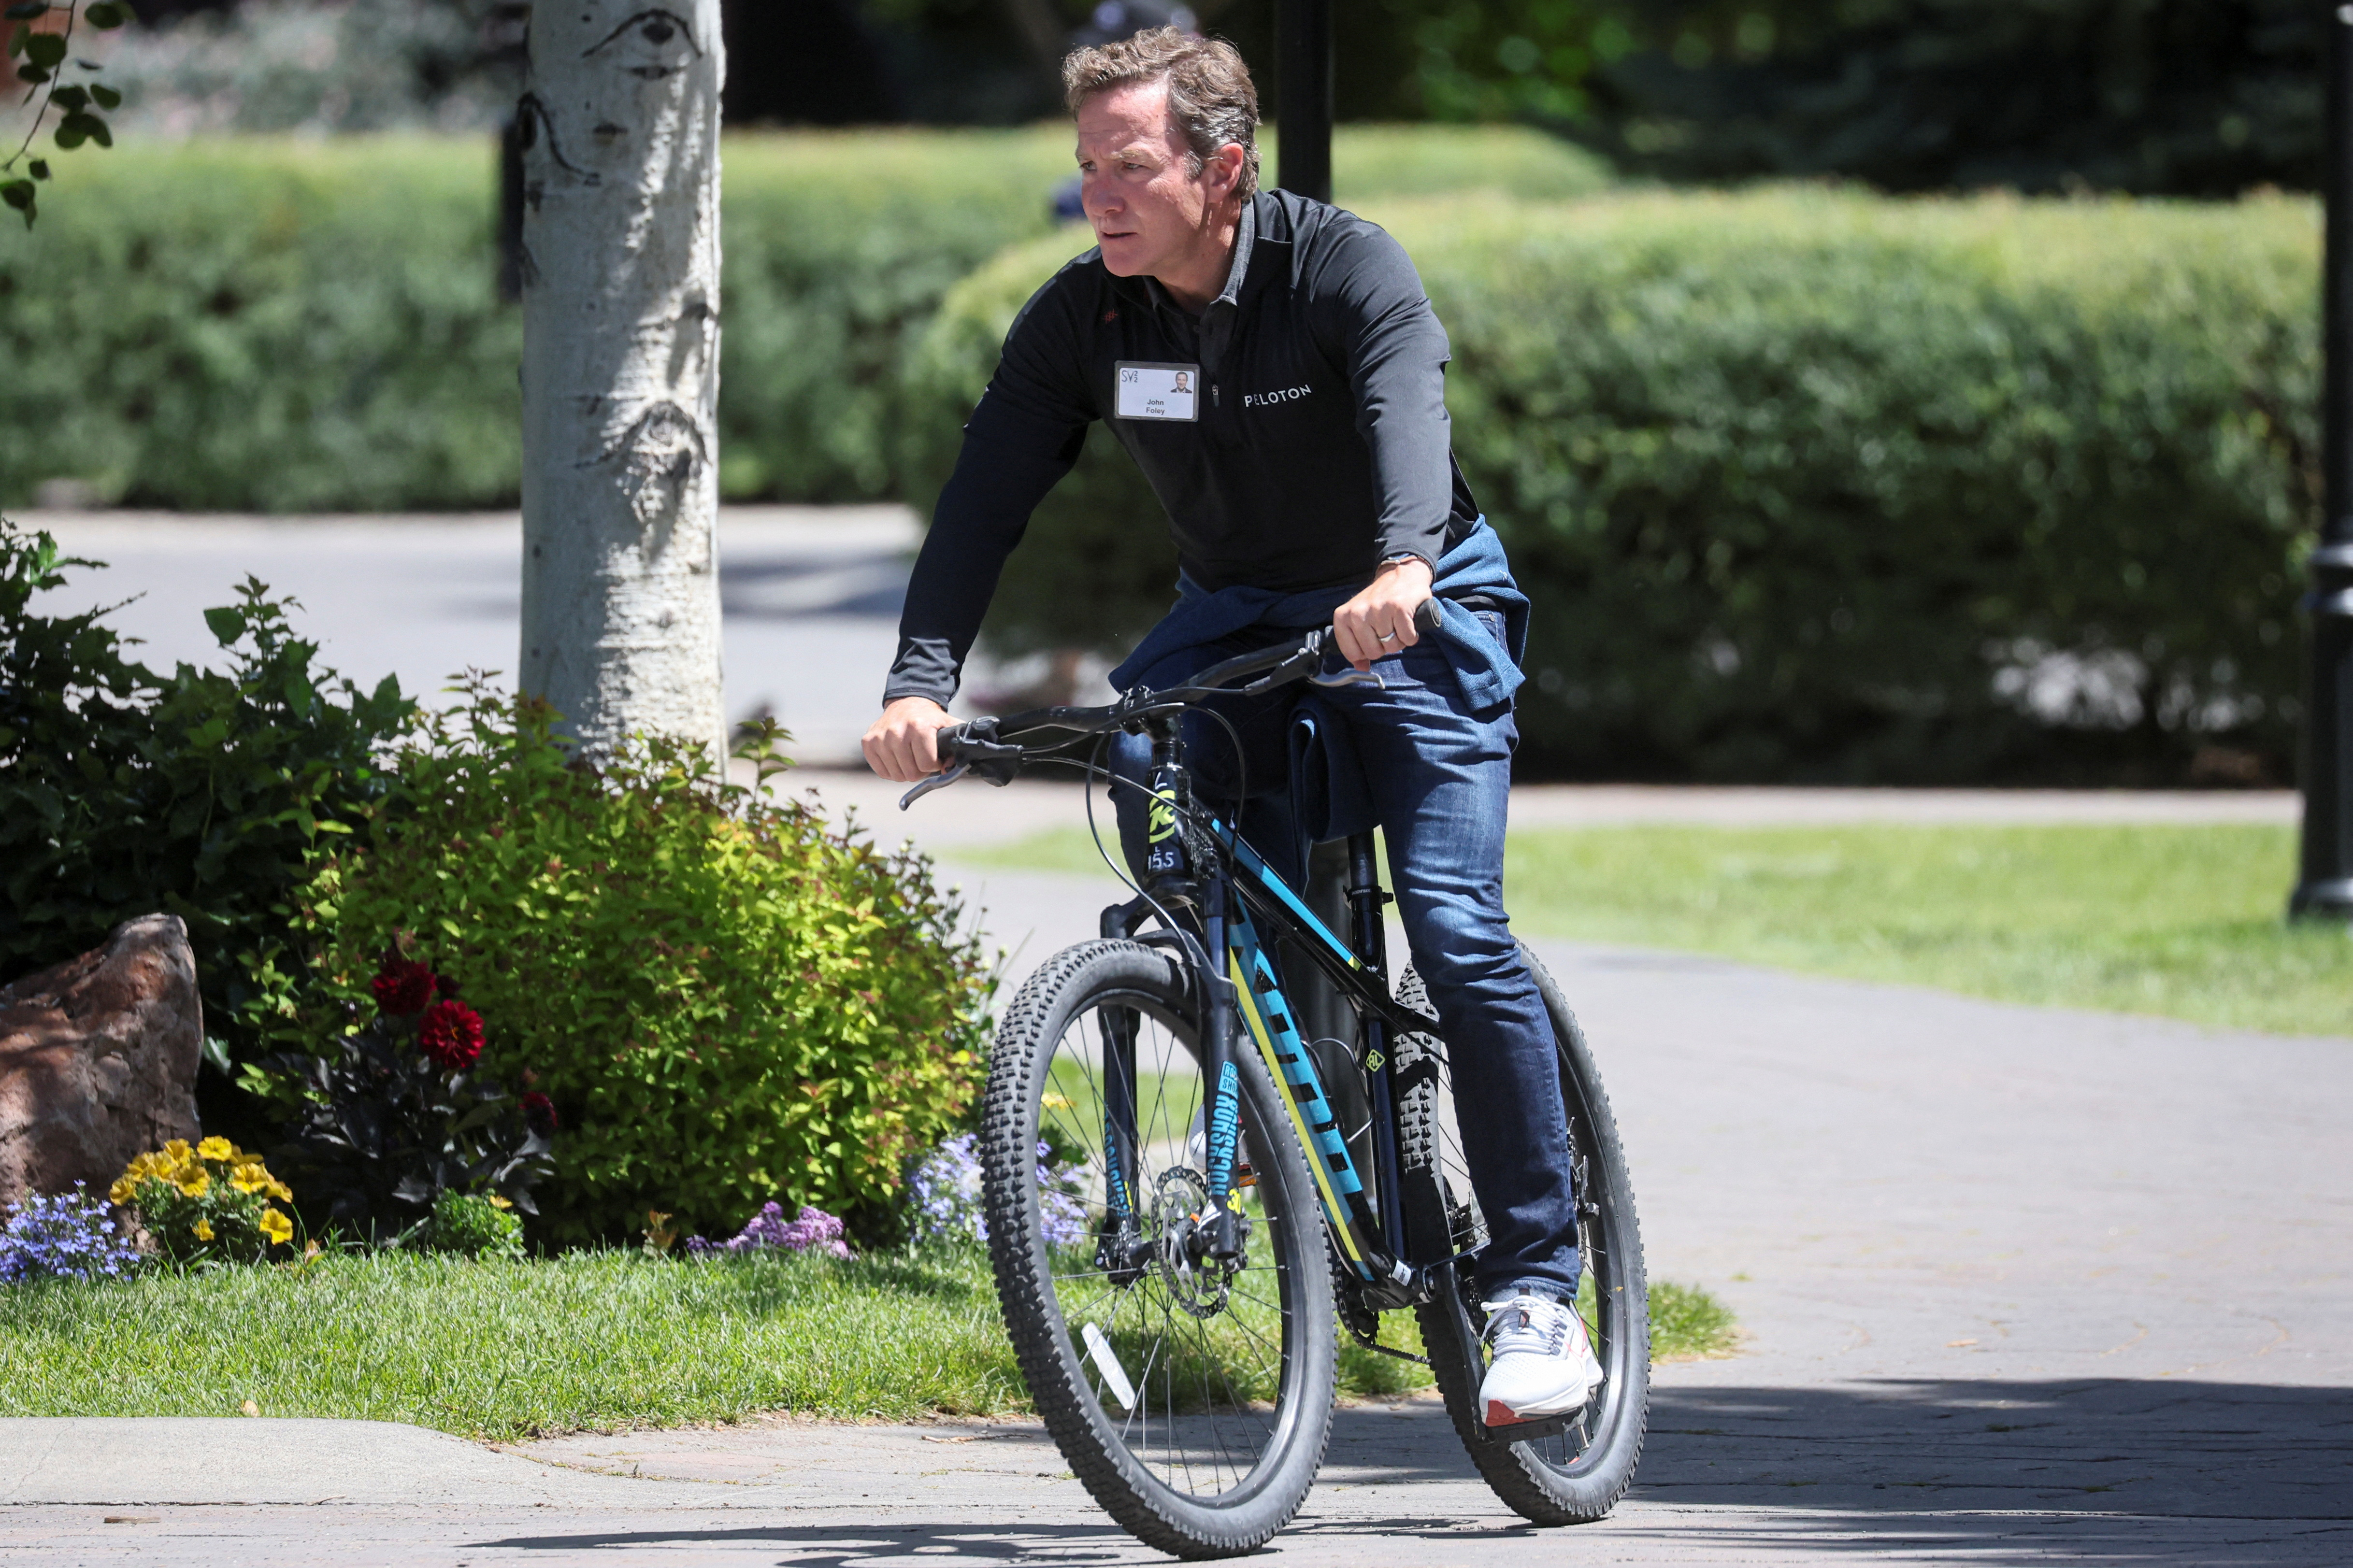 John Foley, co-founder Peloton Interactive, attends the annual Allen and Co. Sun Valley Media Conference in Sun Valley, Idaho, U.S., July 7, 2022.